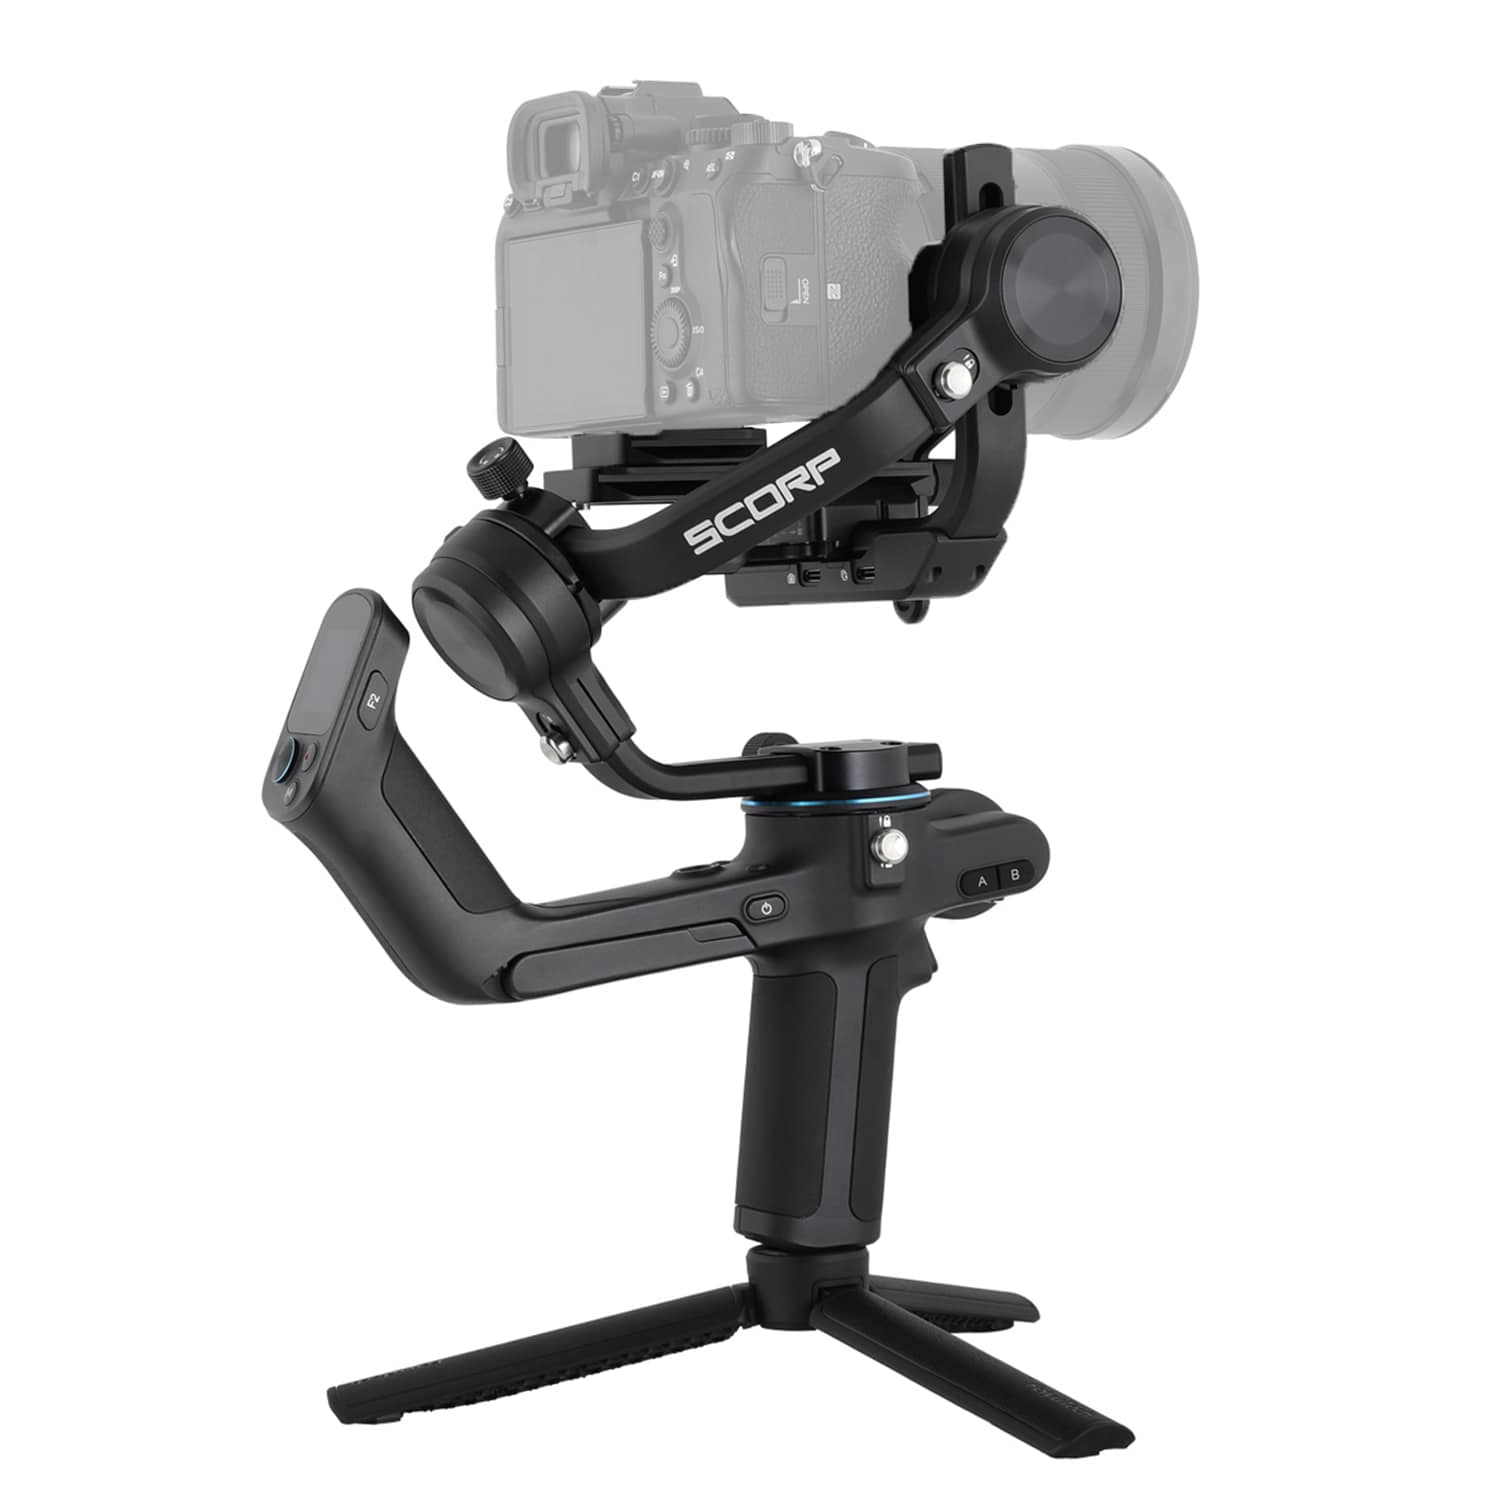 SCORP OLED Touch Screen Control 3-Axis Handheld Gimbal Stabilizer for DSLR Mirrorless Camera